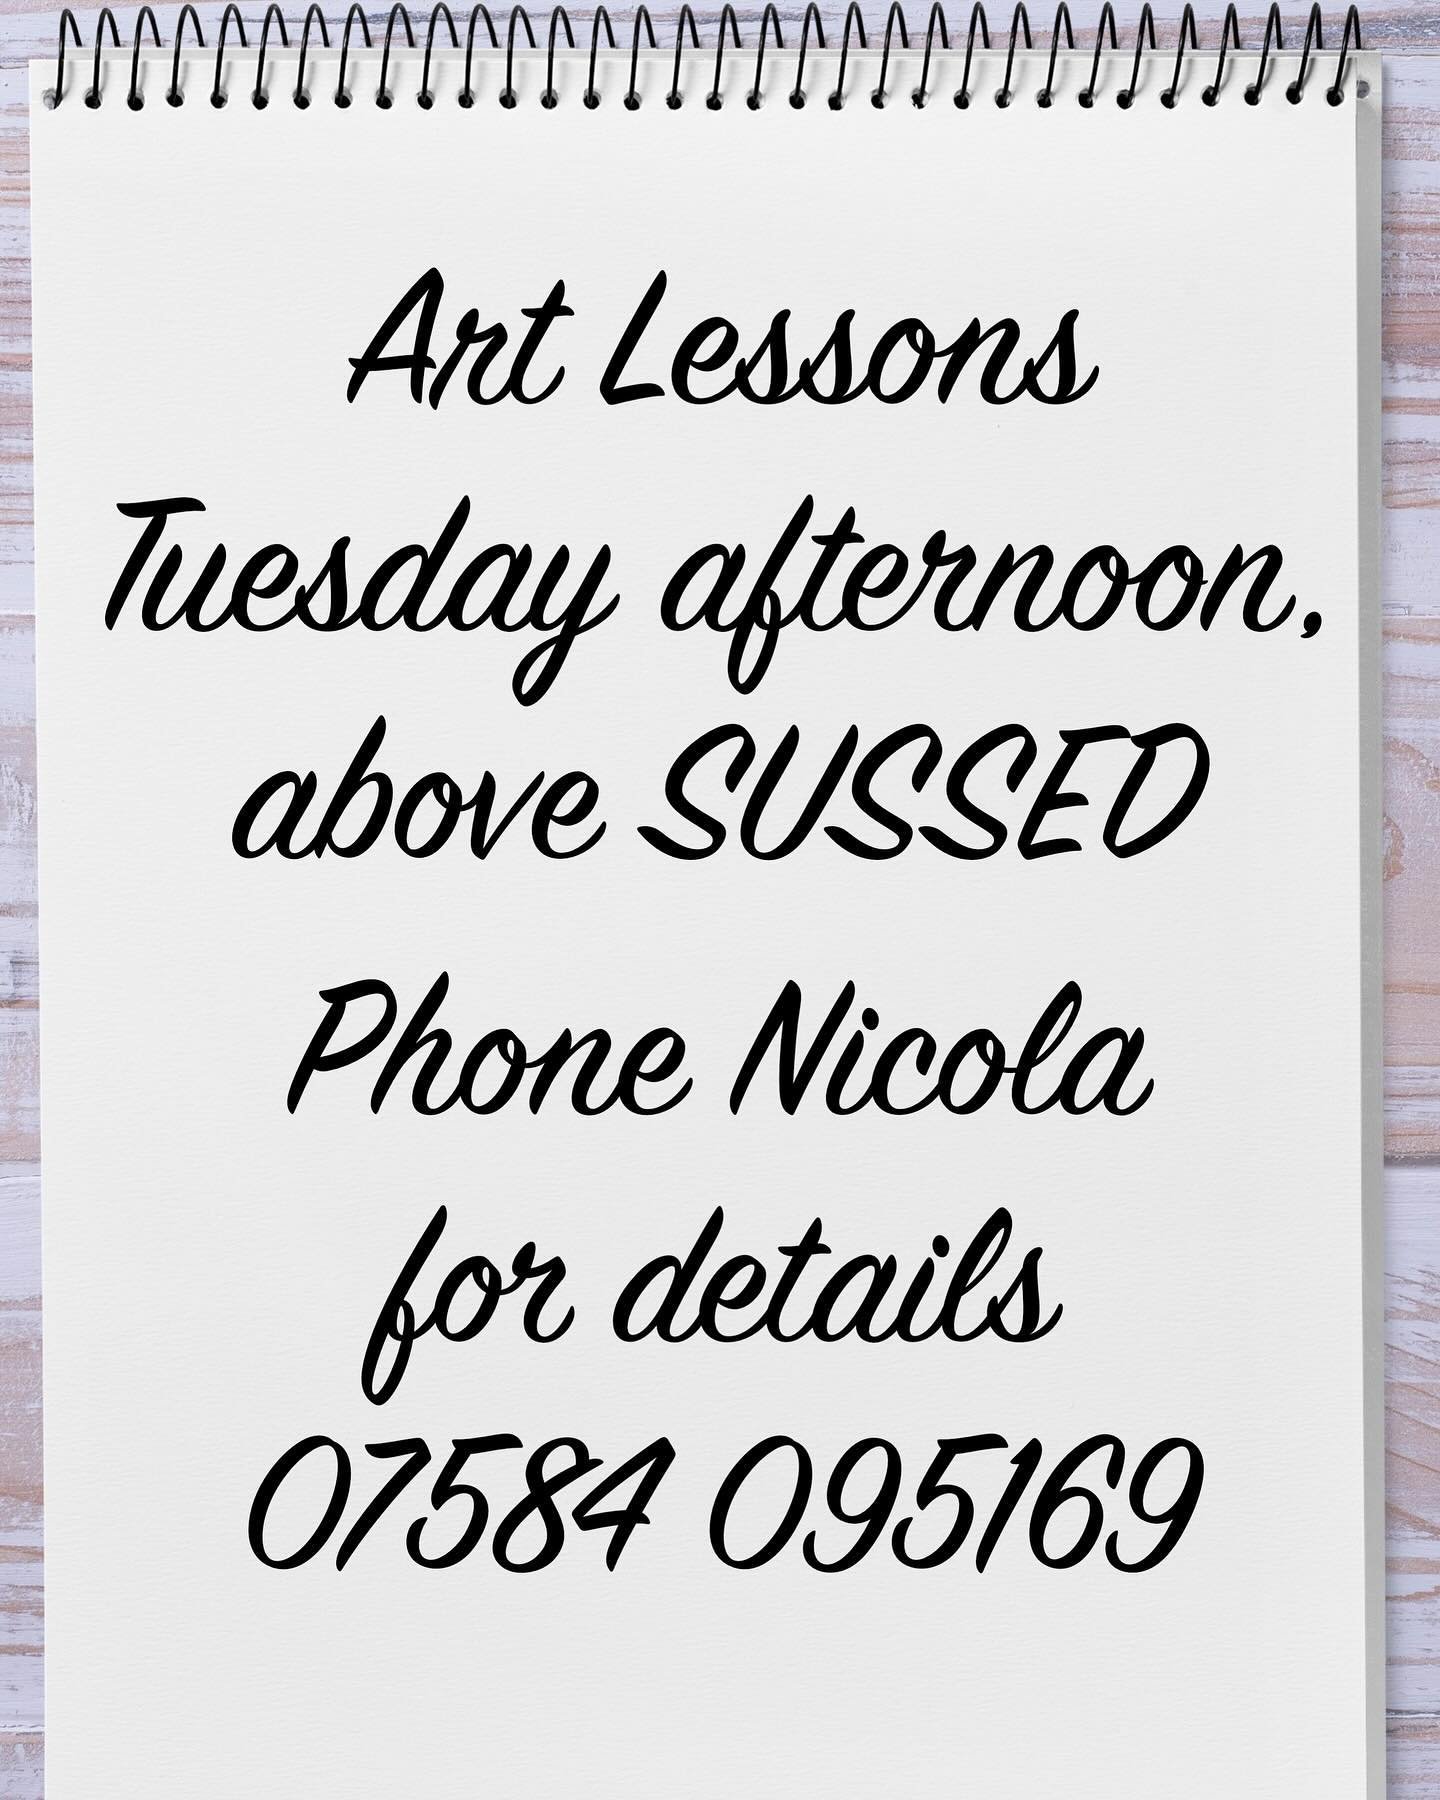 Art lessons every Tuesday afternoon above SUSSED